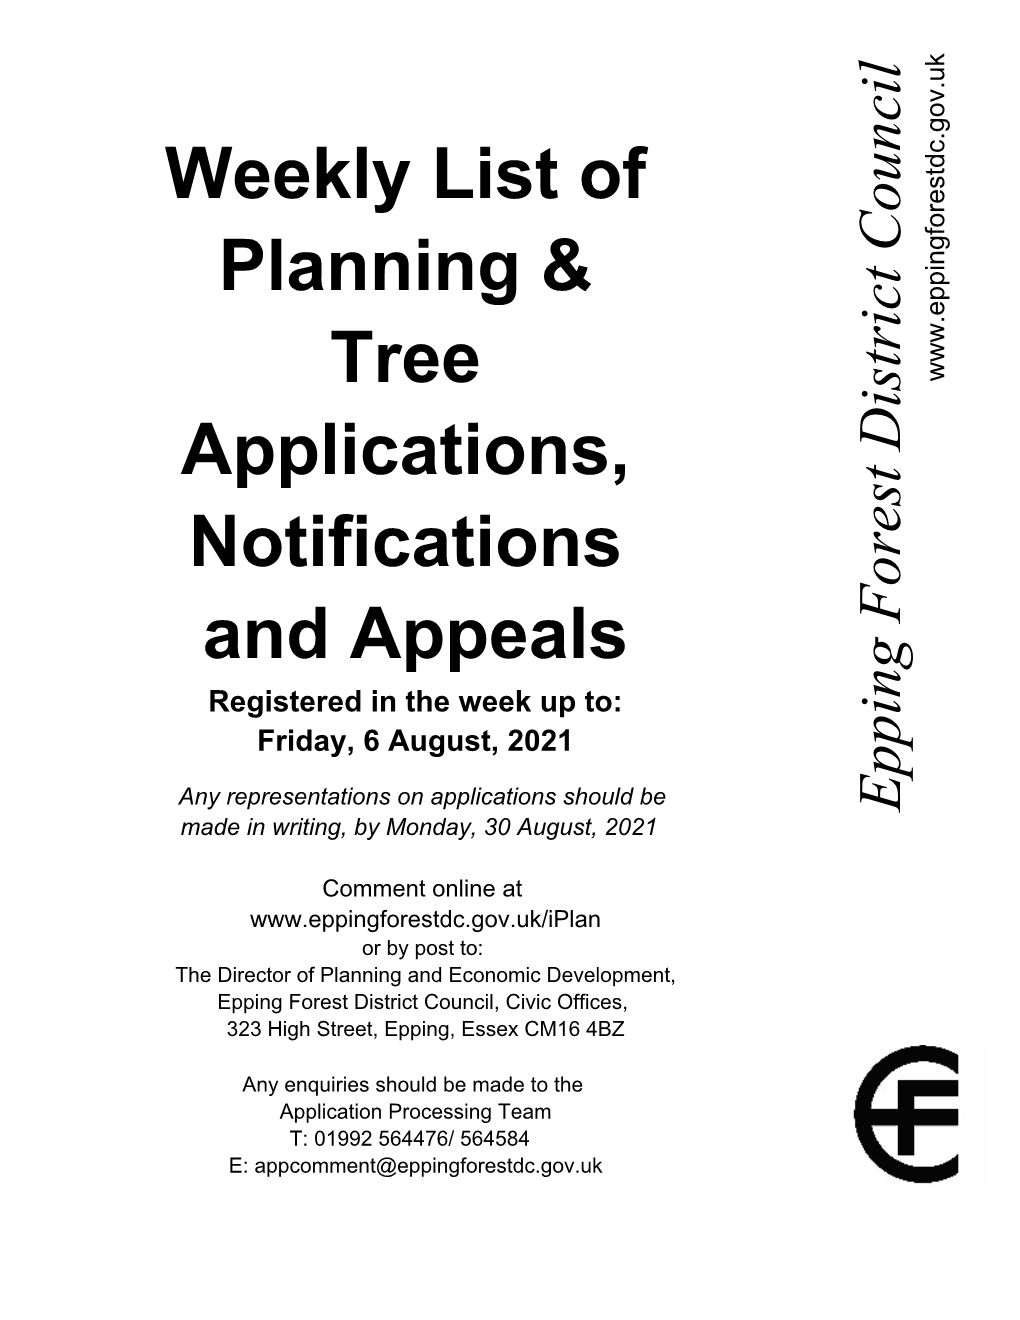 Weekly List of Planning & Tree Apllications, Notifications and Appeals